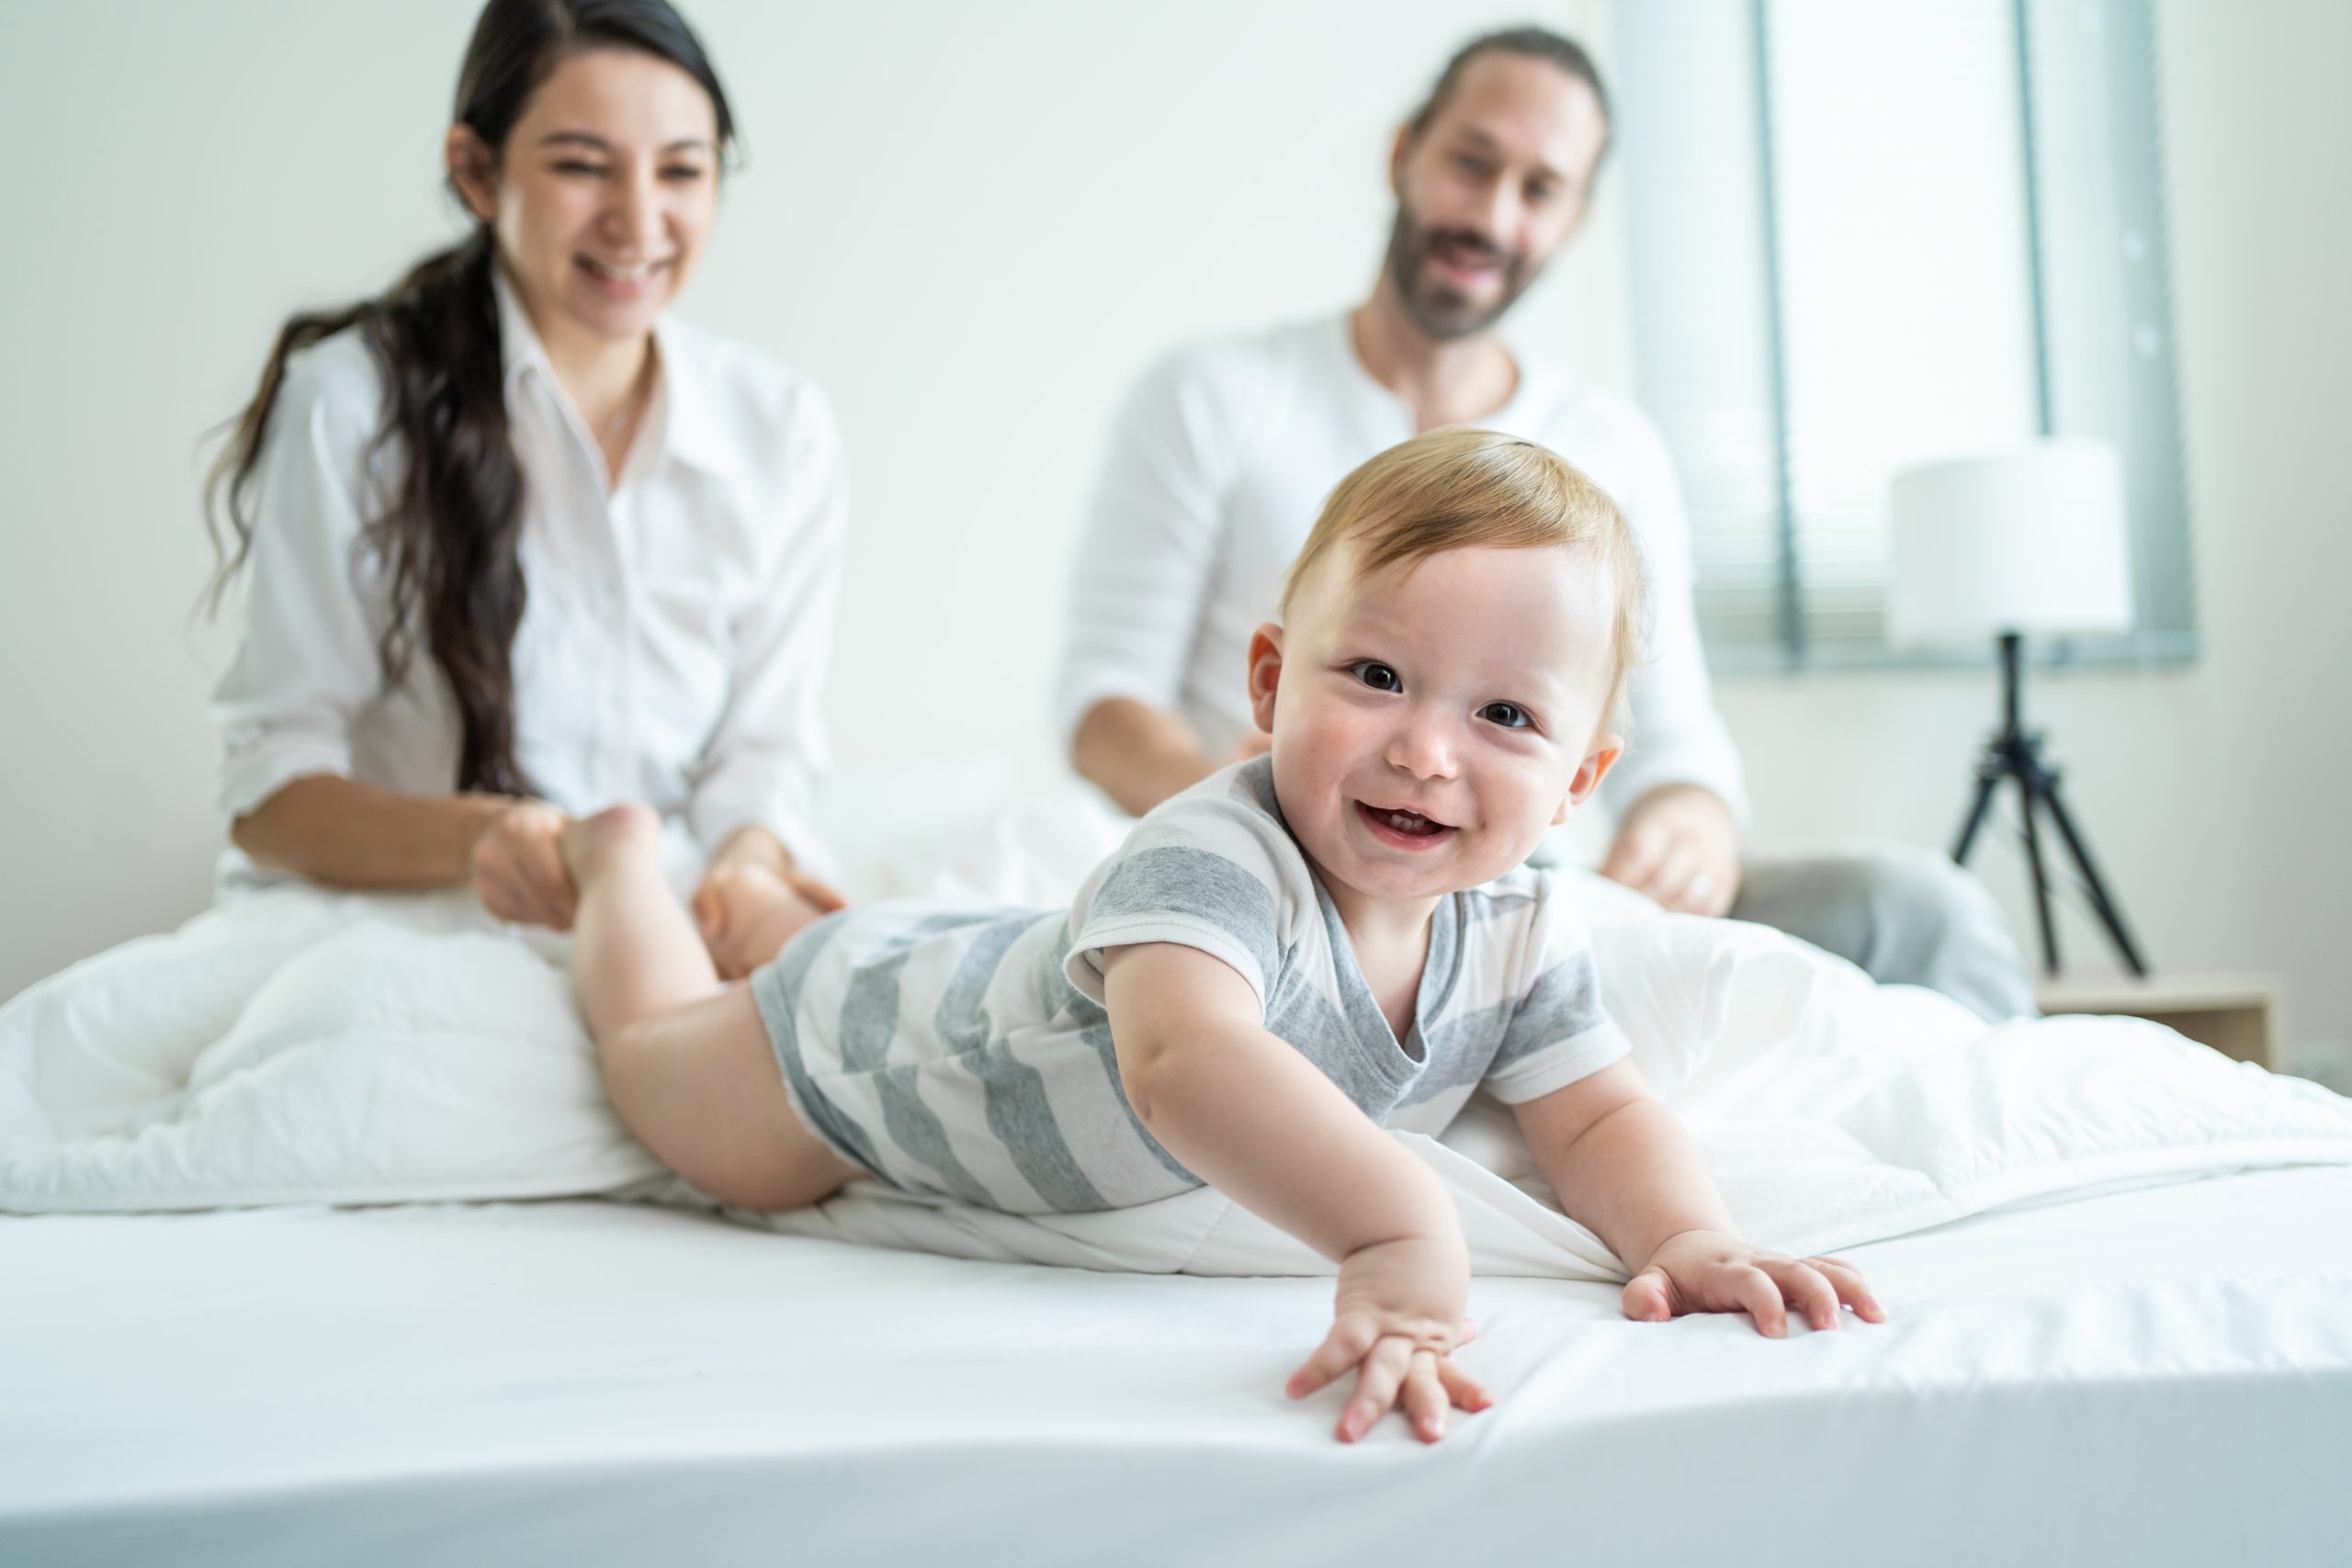 Portrait of Caucasian happy family smiling, look at camera in bedroom. Young attractive couple parents, father and mother sit on bed with little baby boy child enjoy morning wake up activity at home.